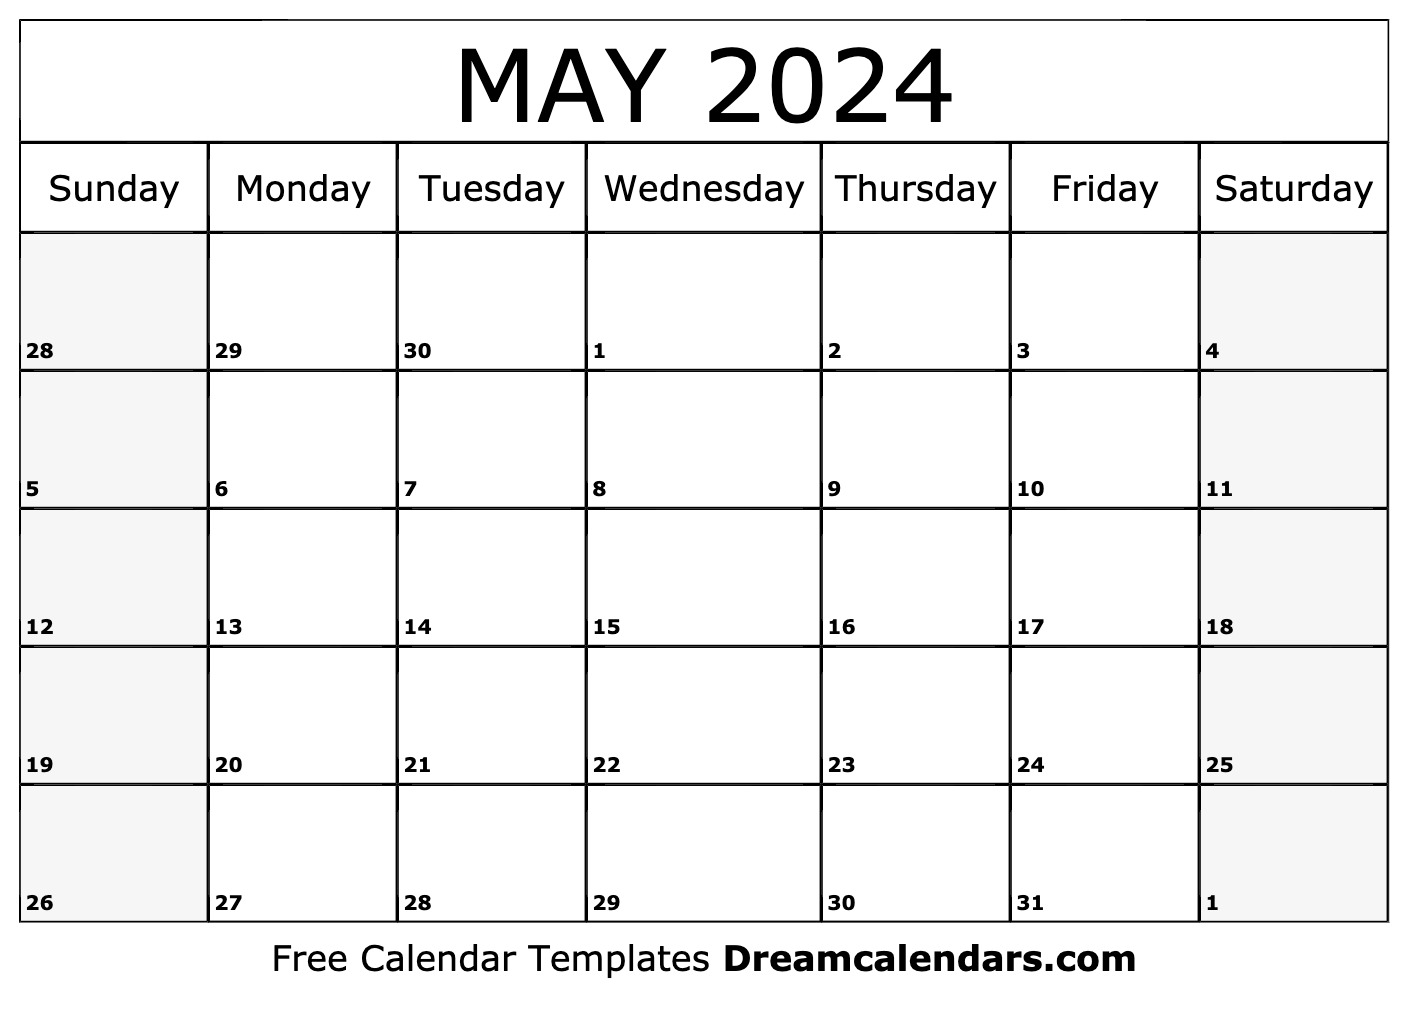 may-calendar-2024-printable-free-cool-the-best-famous-printable-calendar-for-2024-free